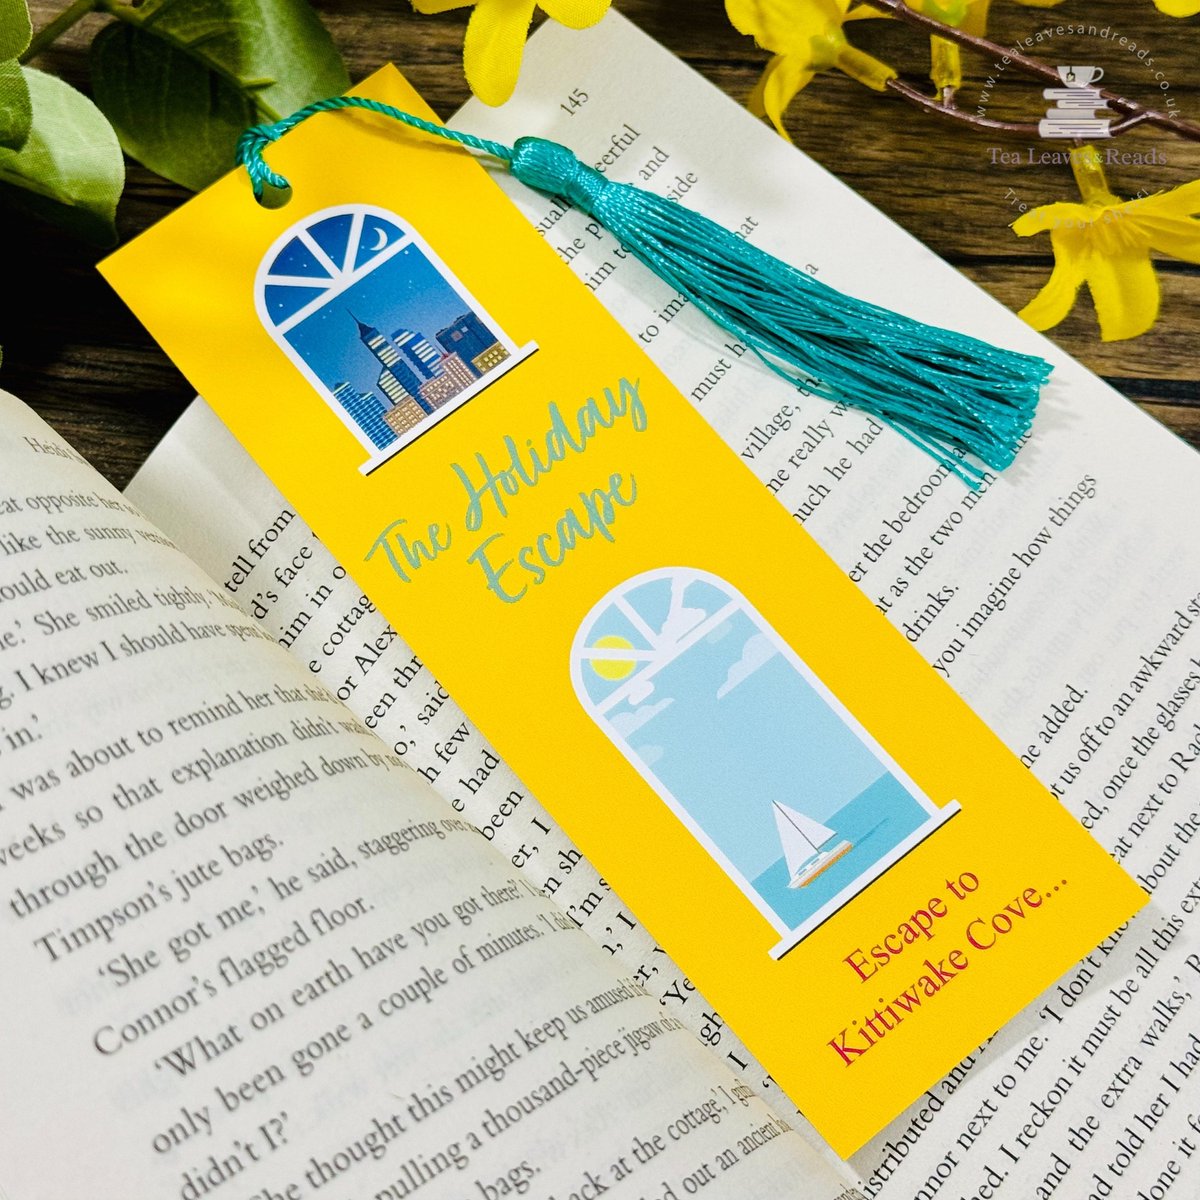 Heidi's contemporary romances are adored by thousands of readers and we can't wait for her next novel, #TheHolidayEscape (April) 

Once again, we've made a bookmark to go with it!

tealeavesandreads.co.uk/product/the-ho…